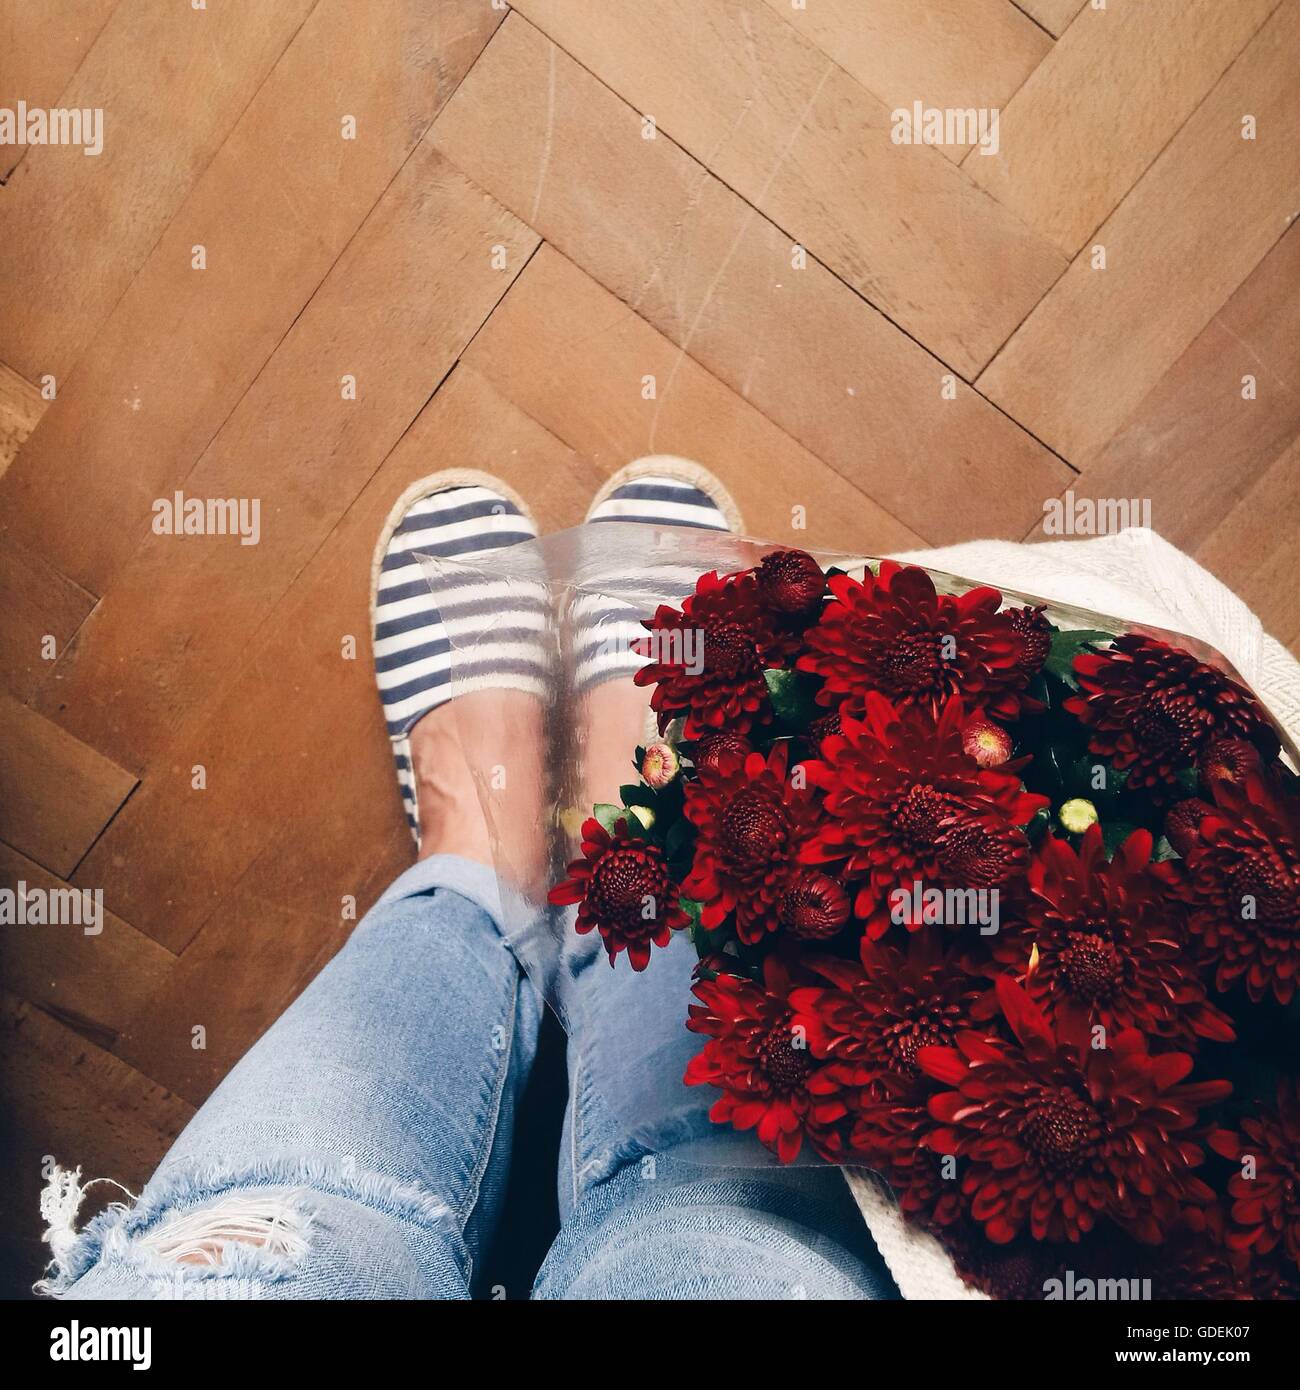 Woman's legs and flowers in  a bag Stock Photo